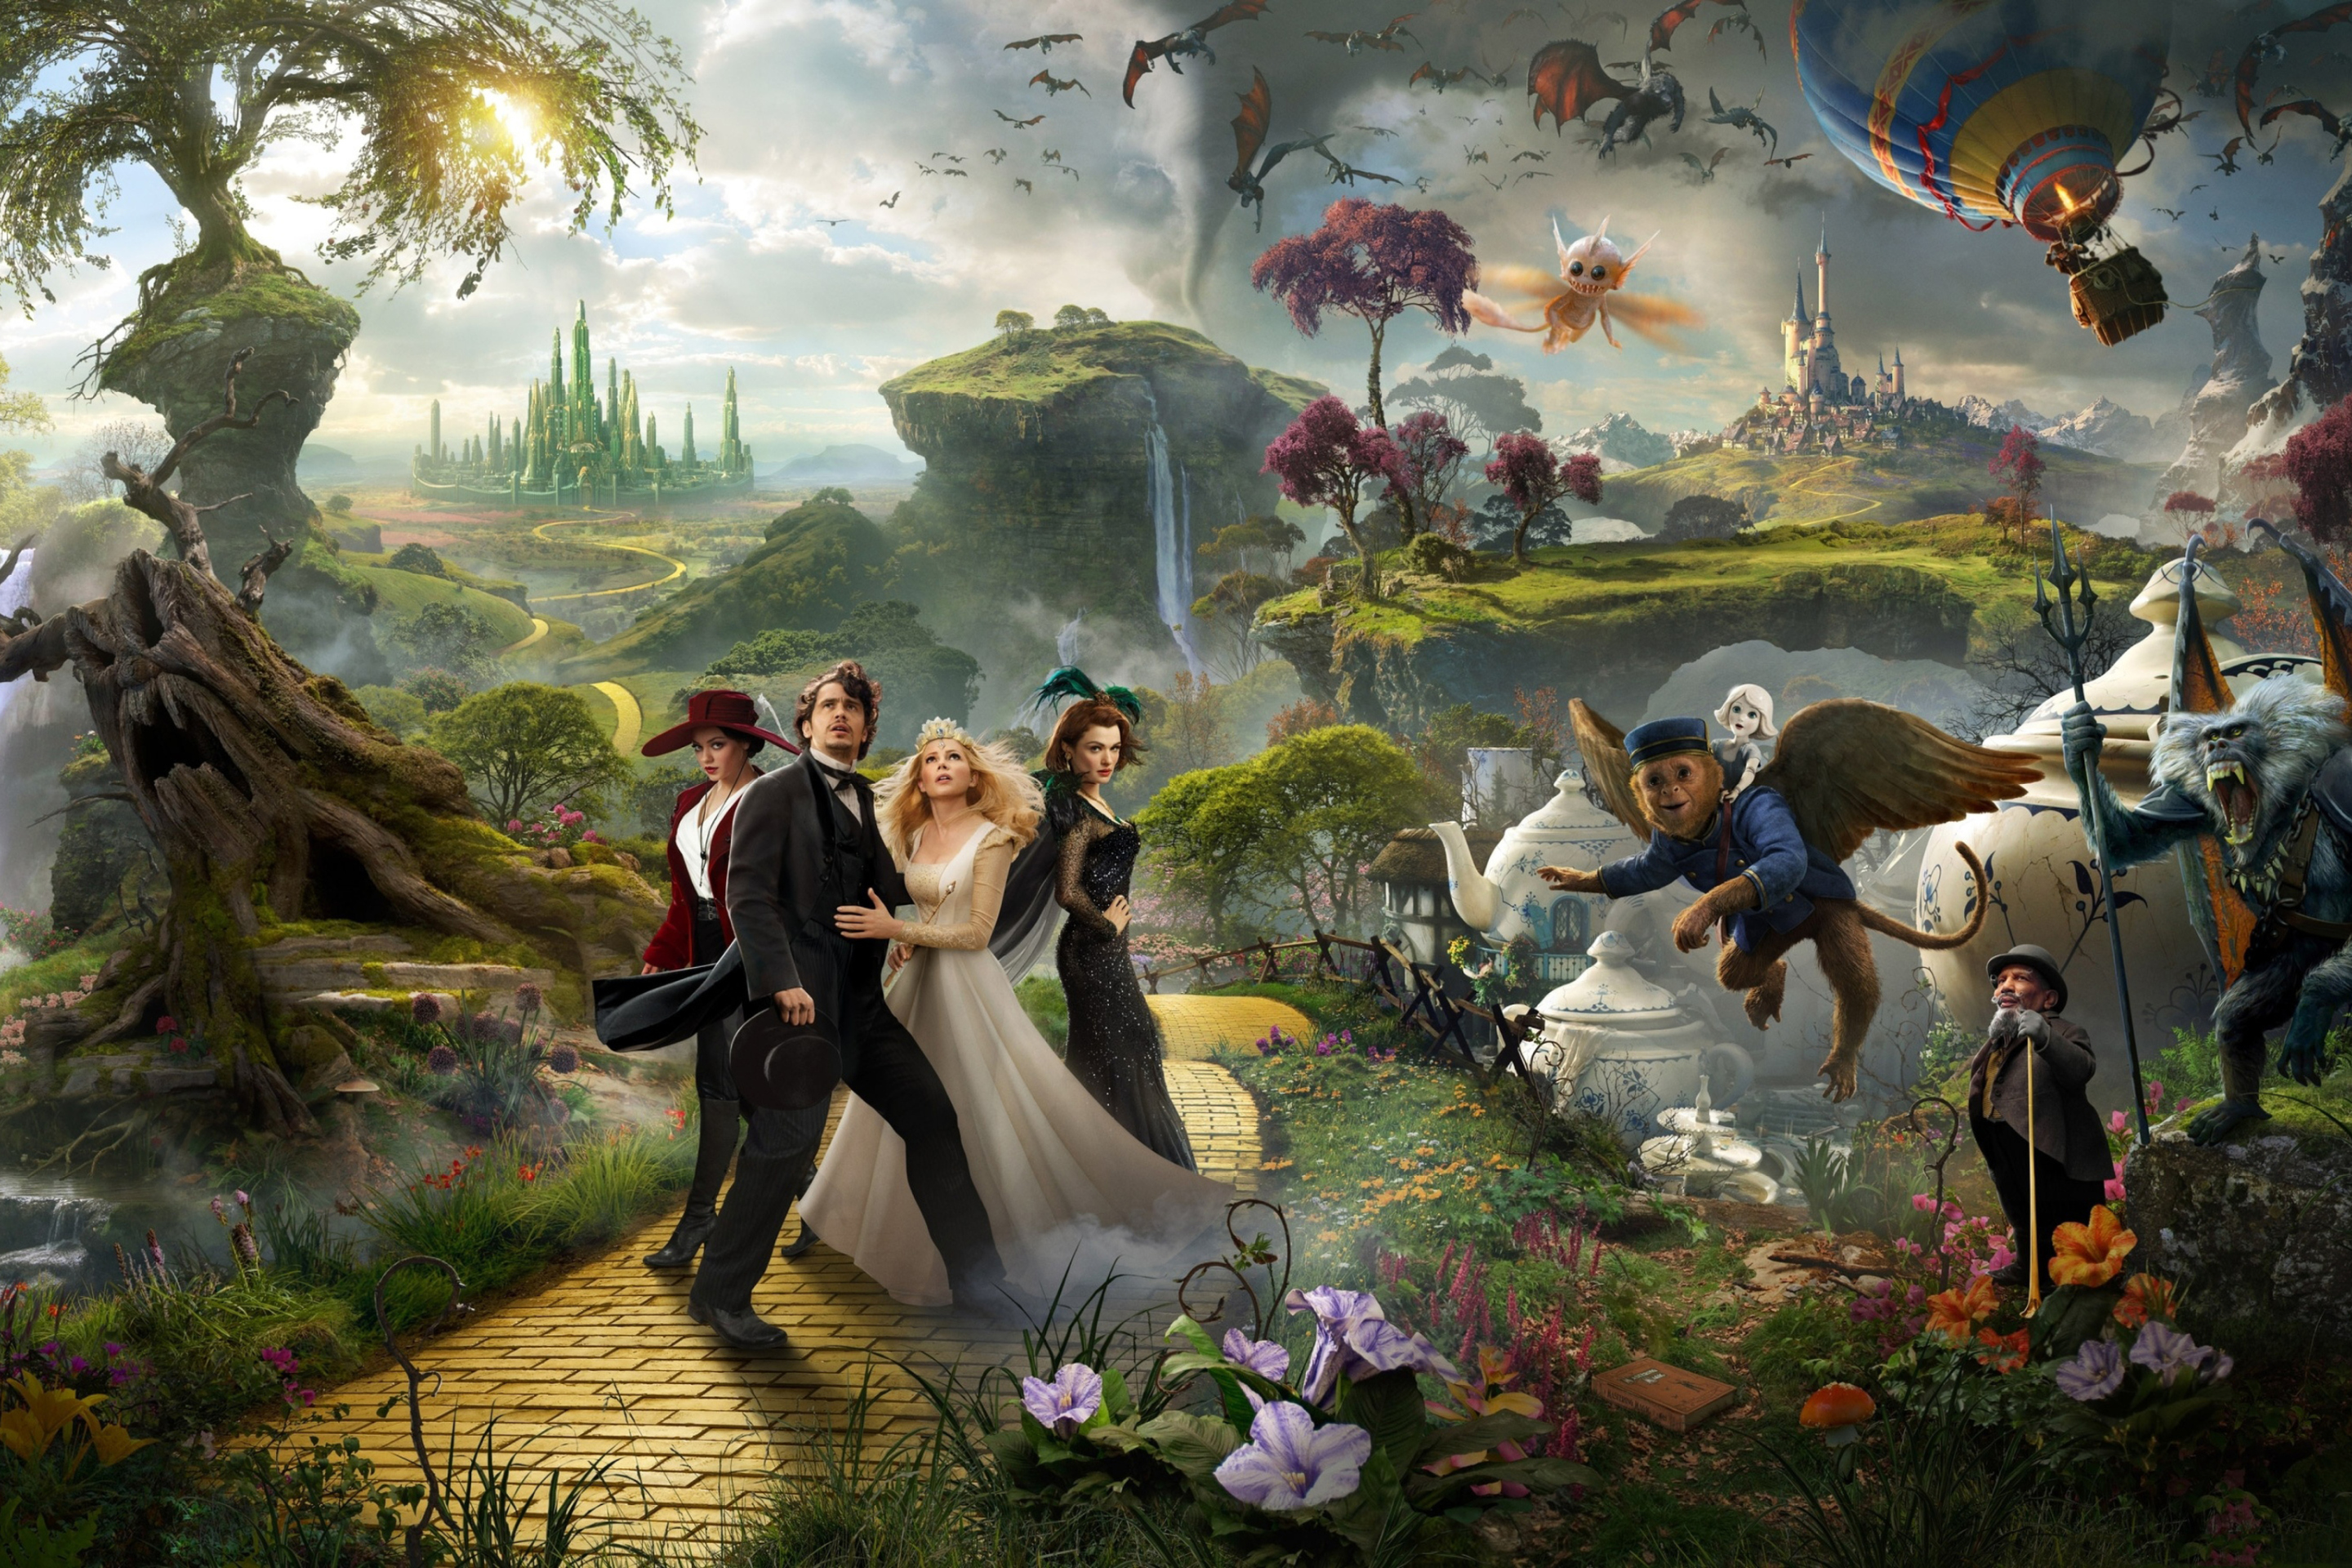 Oz The Great And Powerful 2013 Movie screenshot #1 2880x1920